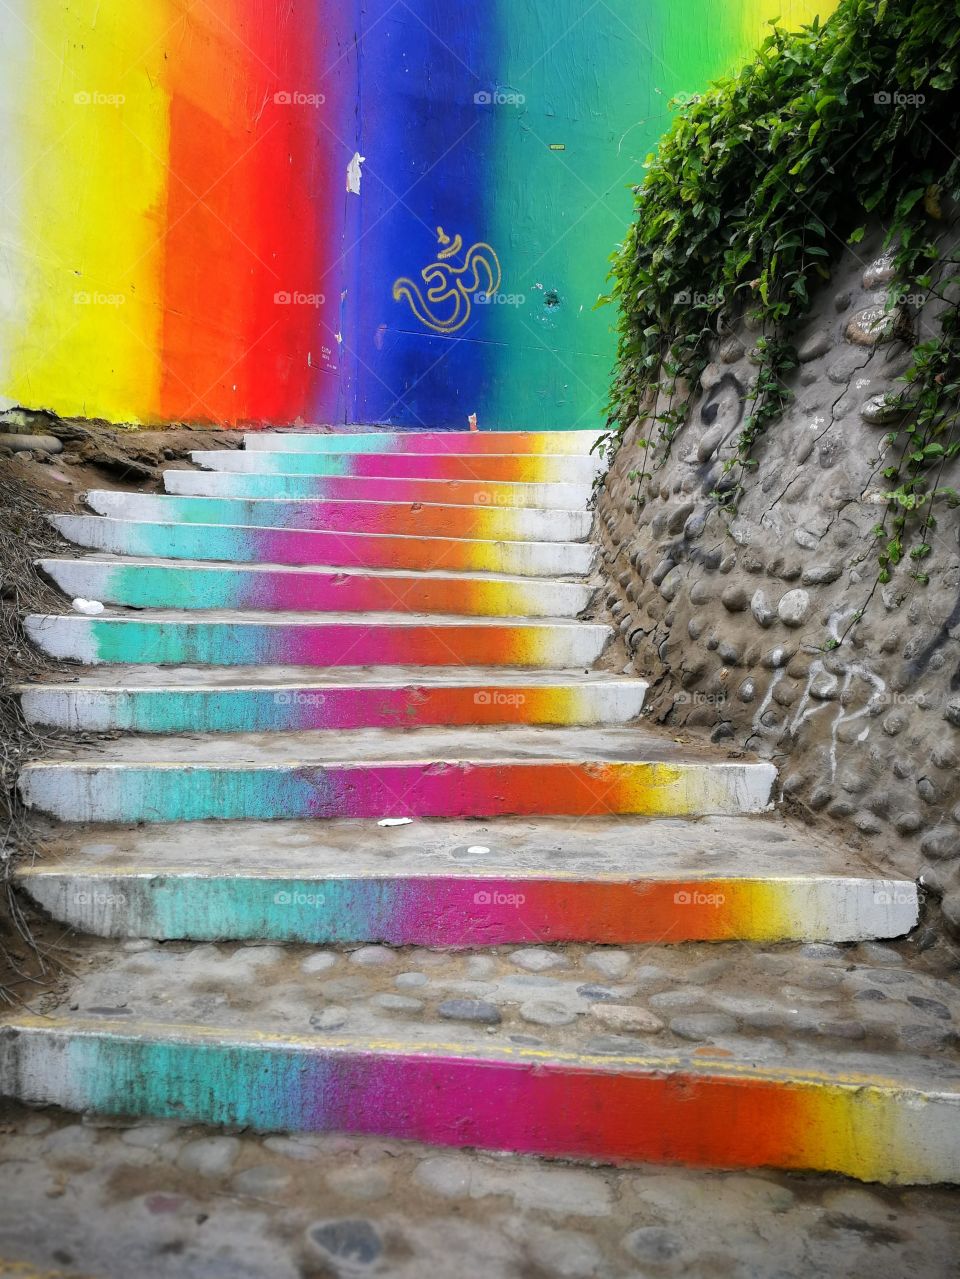 stairs brightly painted with bright colors.